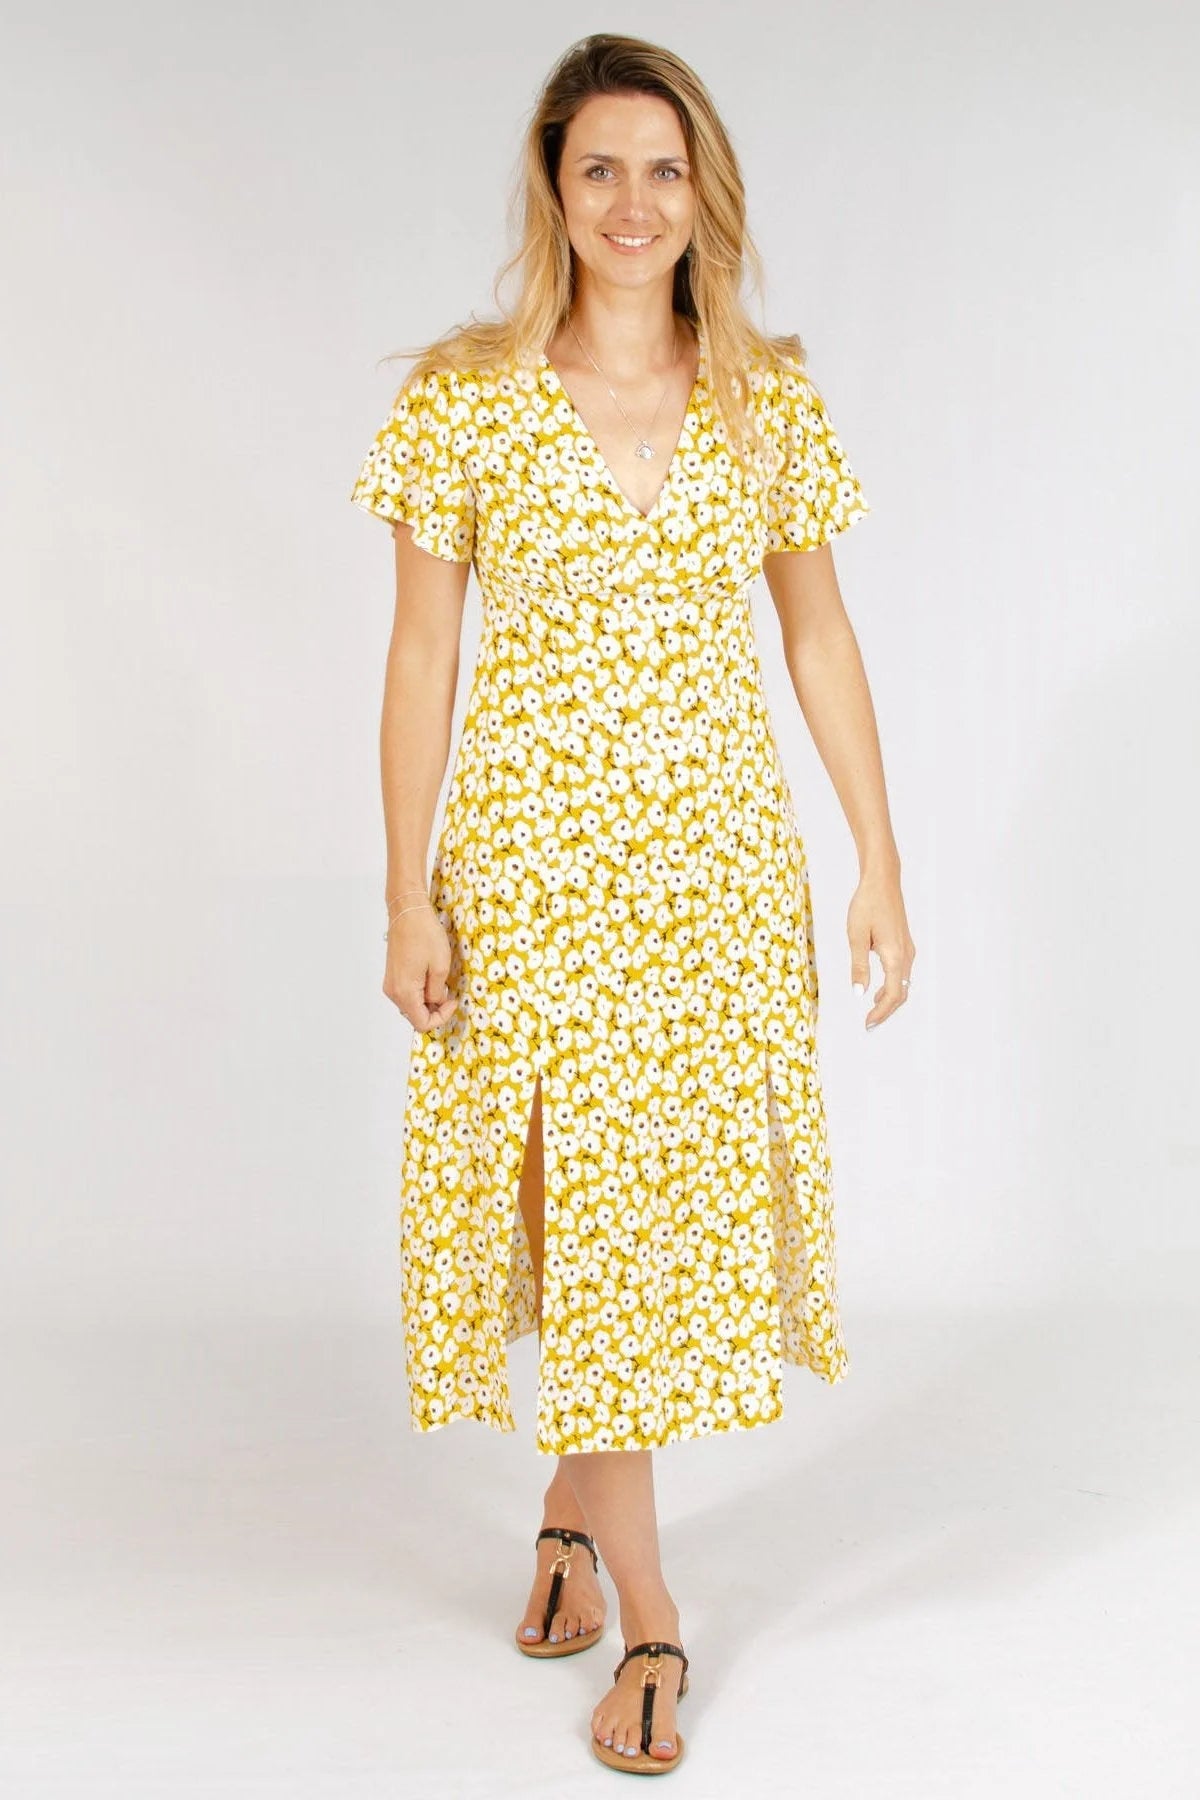 New Look Daisy Floral Summer Dress Yellow Mix / 16